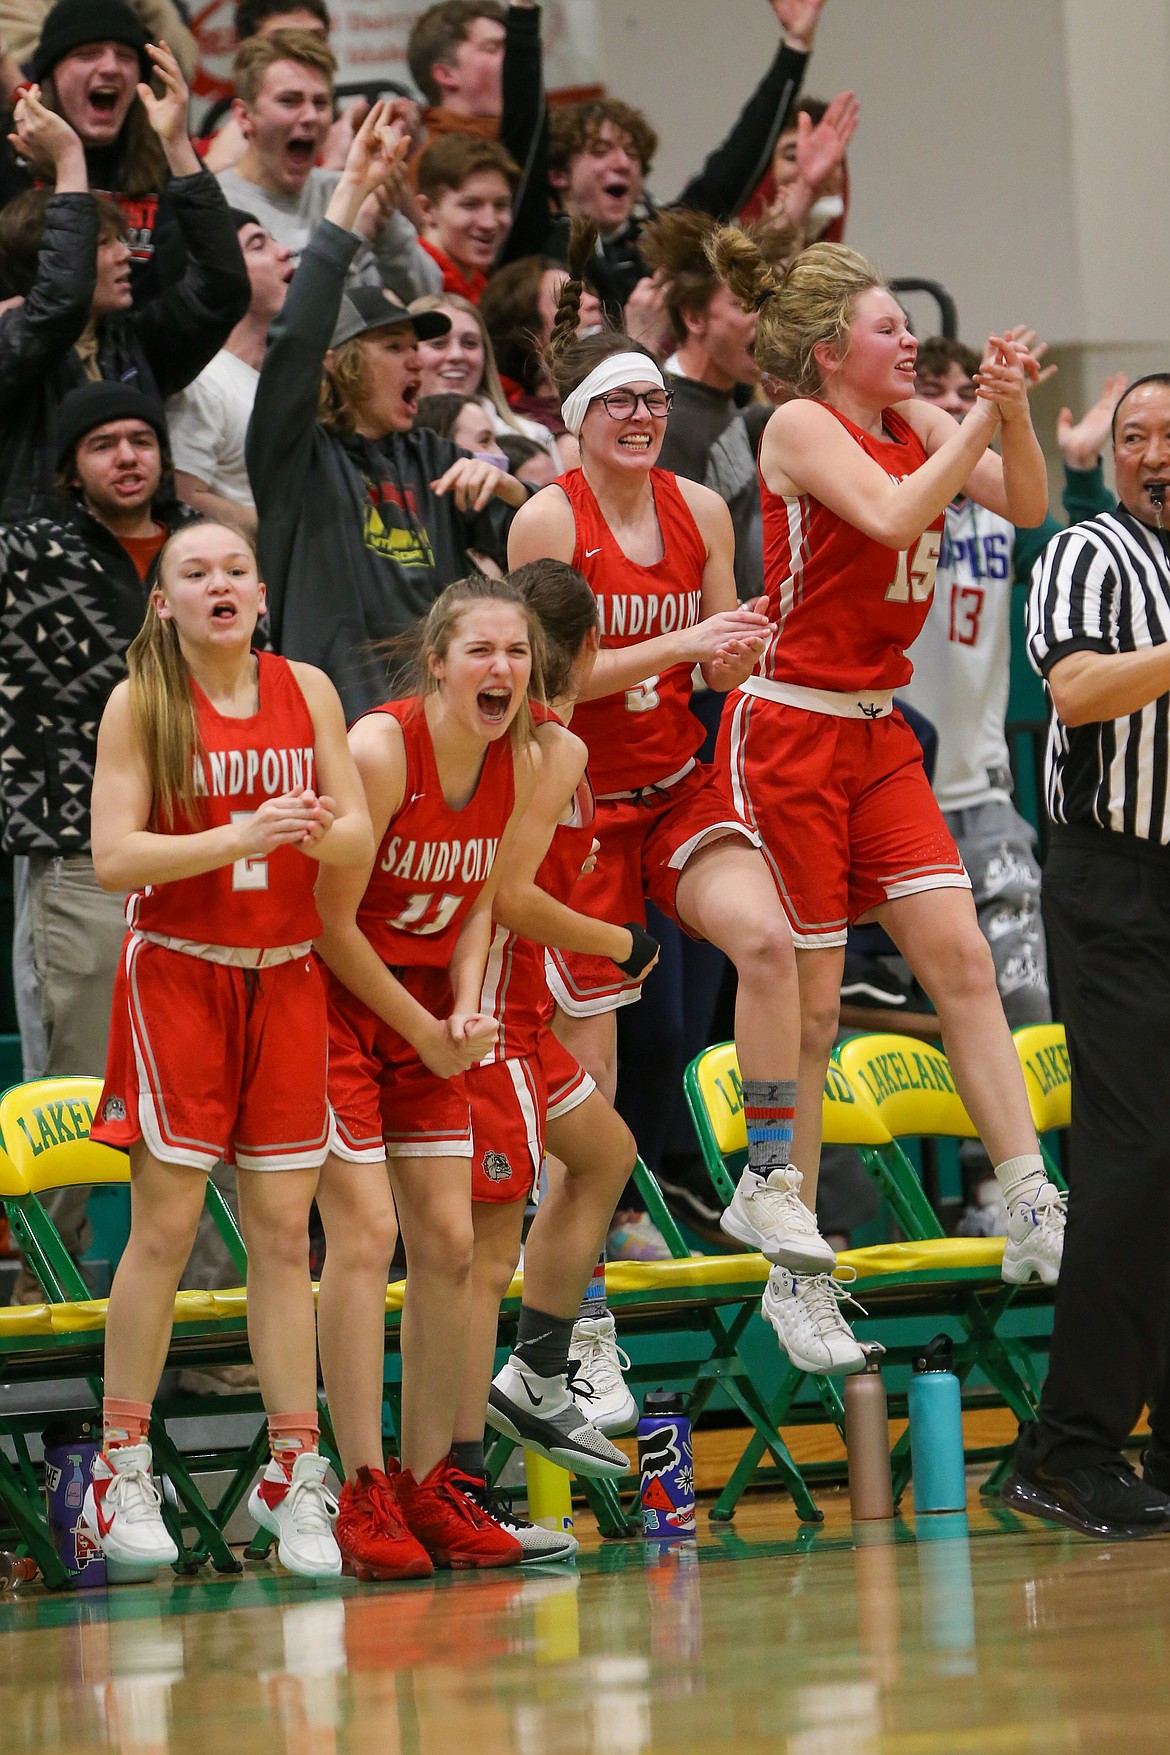 The Sandpoint bench goes nuts during Saturday's game.